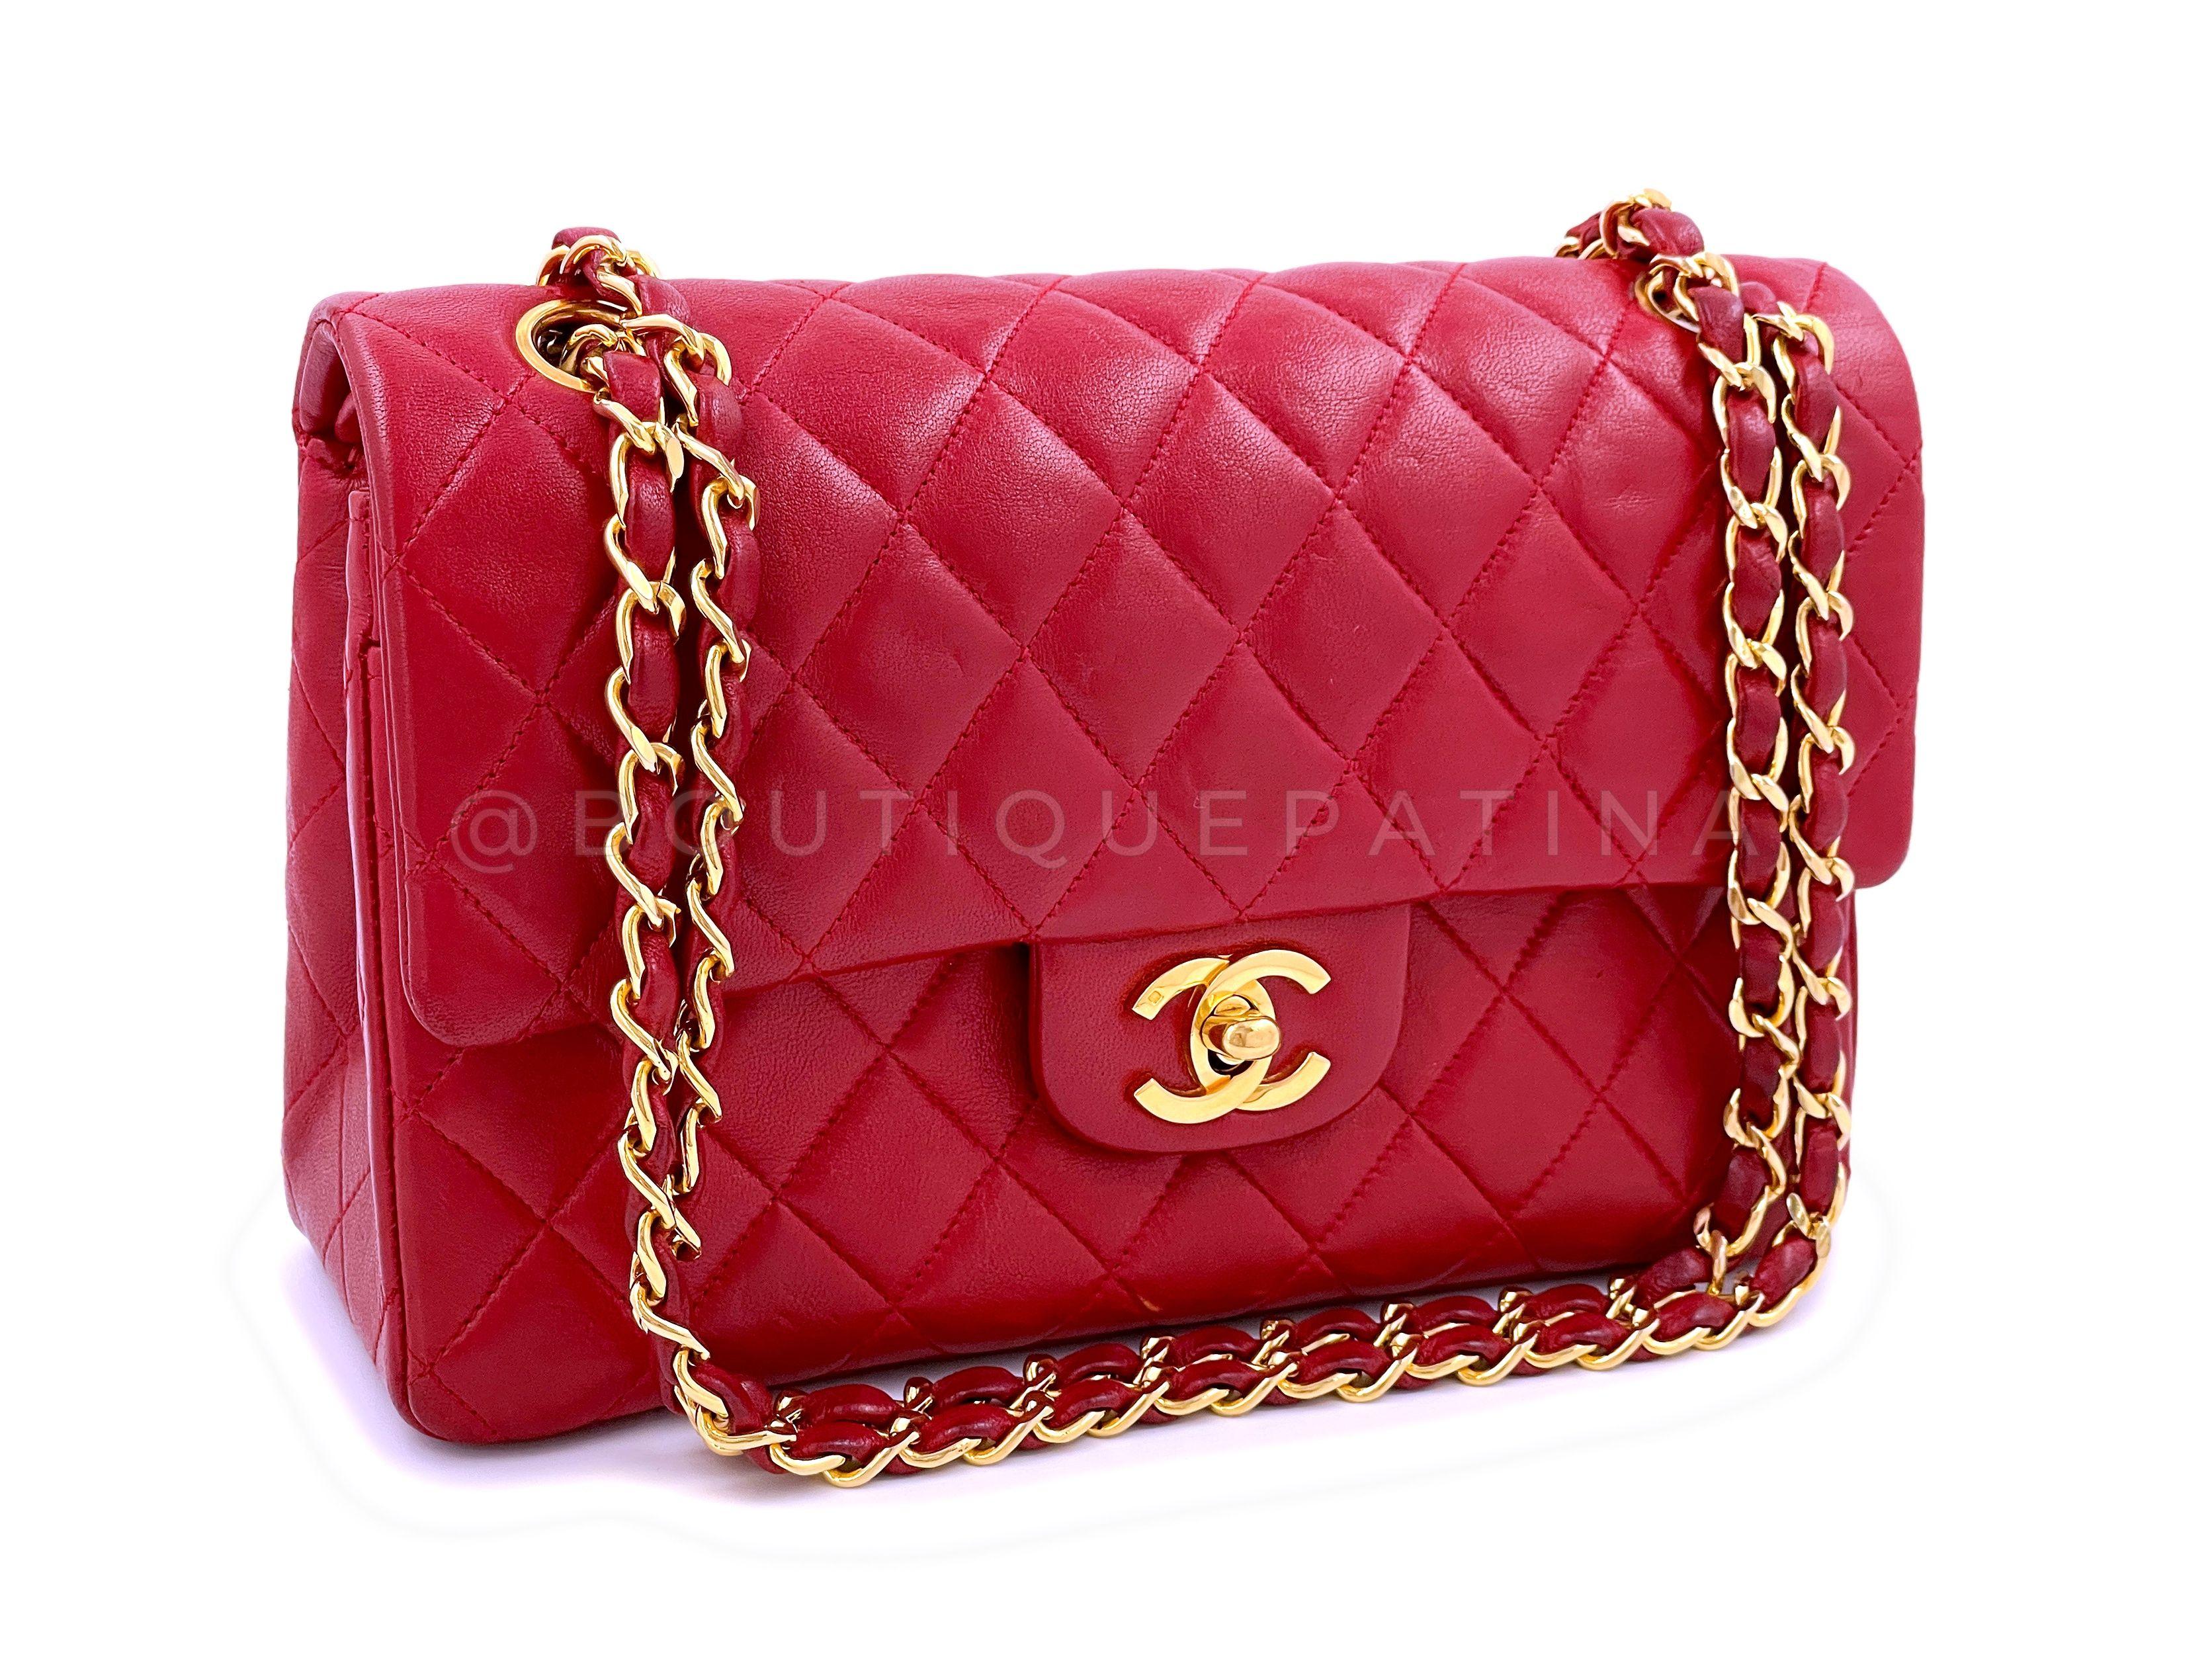 Store SKU: 64794
The iconic holy grail bag is the Chanel Classic Flap. Coveted for its simplicity and elegance - woven chain double strap that can be worn short or long, turnlock CC clasp, lambskin interior. 

With a double flap, or another flap on